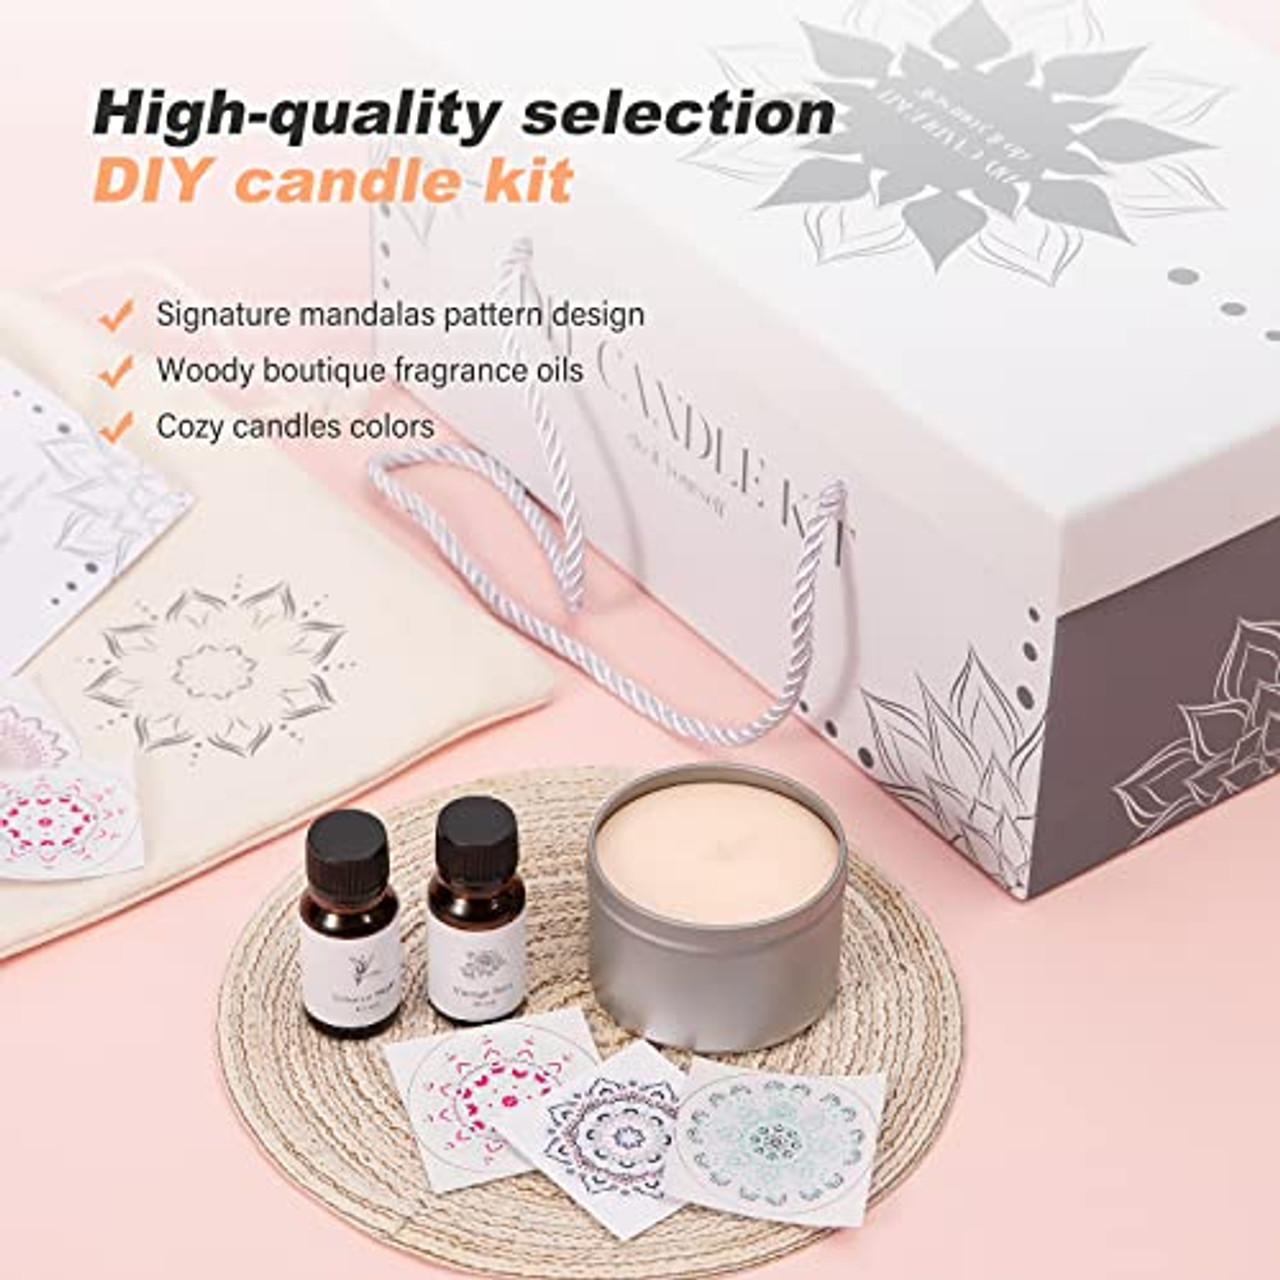 Craftbud Candle Making Kit for Adults, Soy Wax Candle Making Kit, 12.4 oz.  Soy Wax Flakes, Cotton Wicks, Dye Blocks, Melting Pot & Accessories 